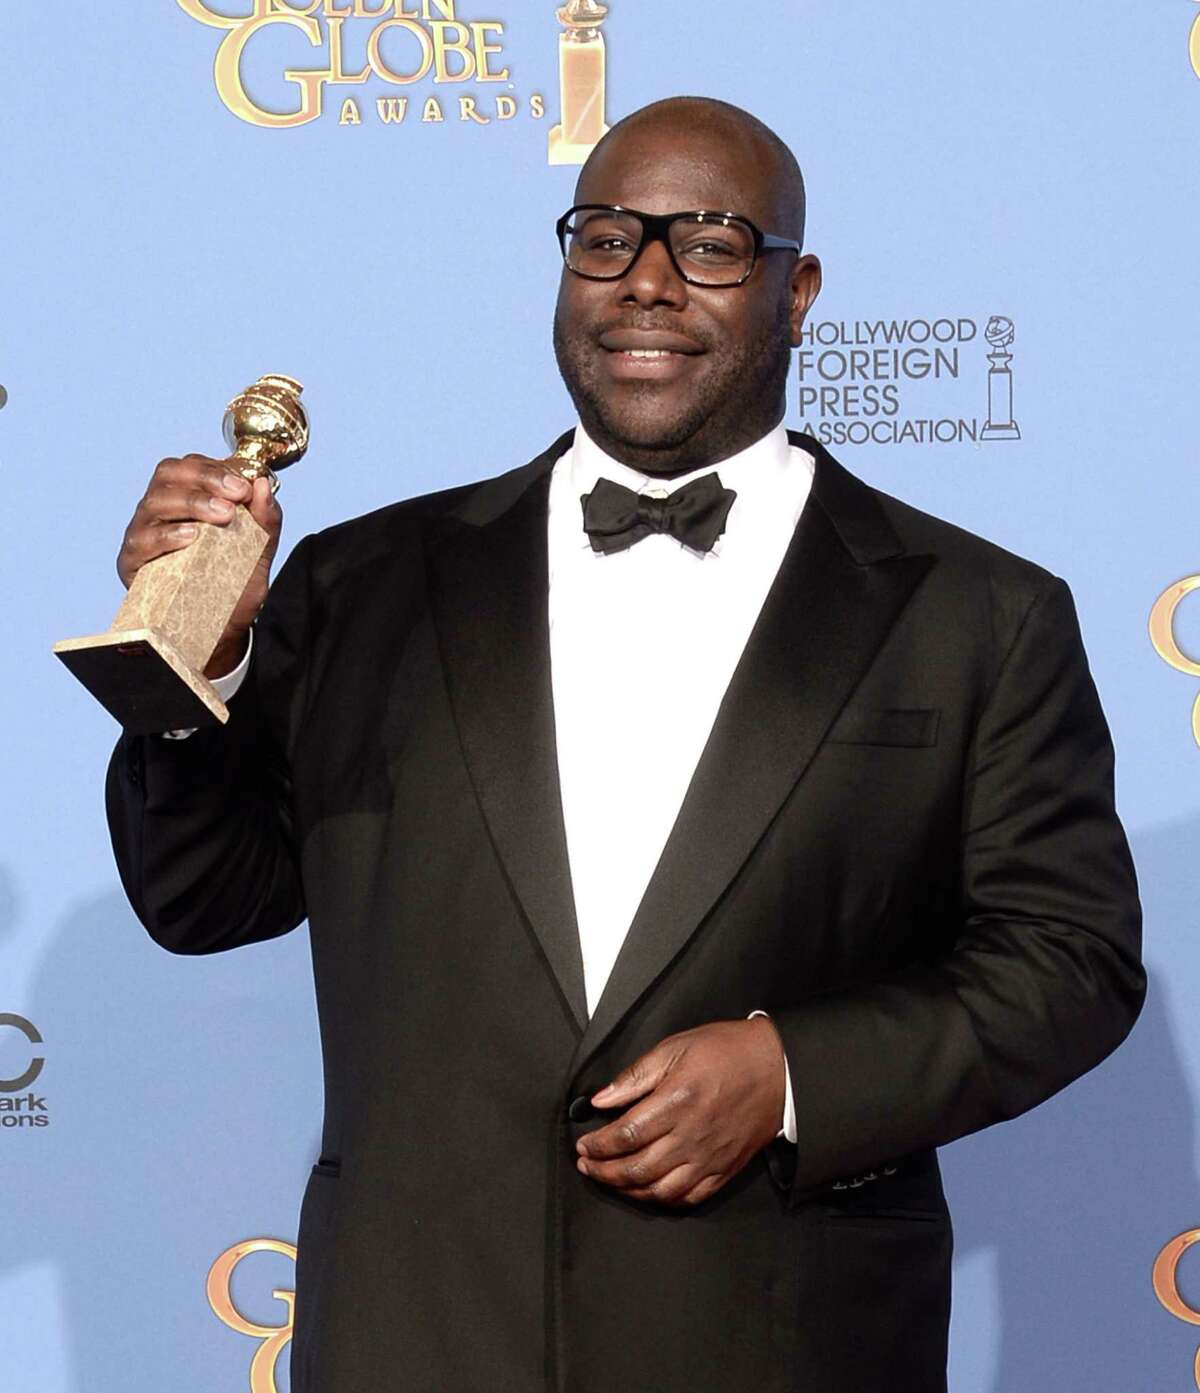 BEVERLY HILLS, CA - JANUARY 12: Director Steve McQueen, winner of Best Motion Picture - Drama for '12 Years a Slave,' poses in the press room during the 71st Annual Golden Globe Awards held at The Beverly Hilton Hotel on January 12, 2014 in Beverly Hills, California. (Photo by Kevin Winter/Getty Images)